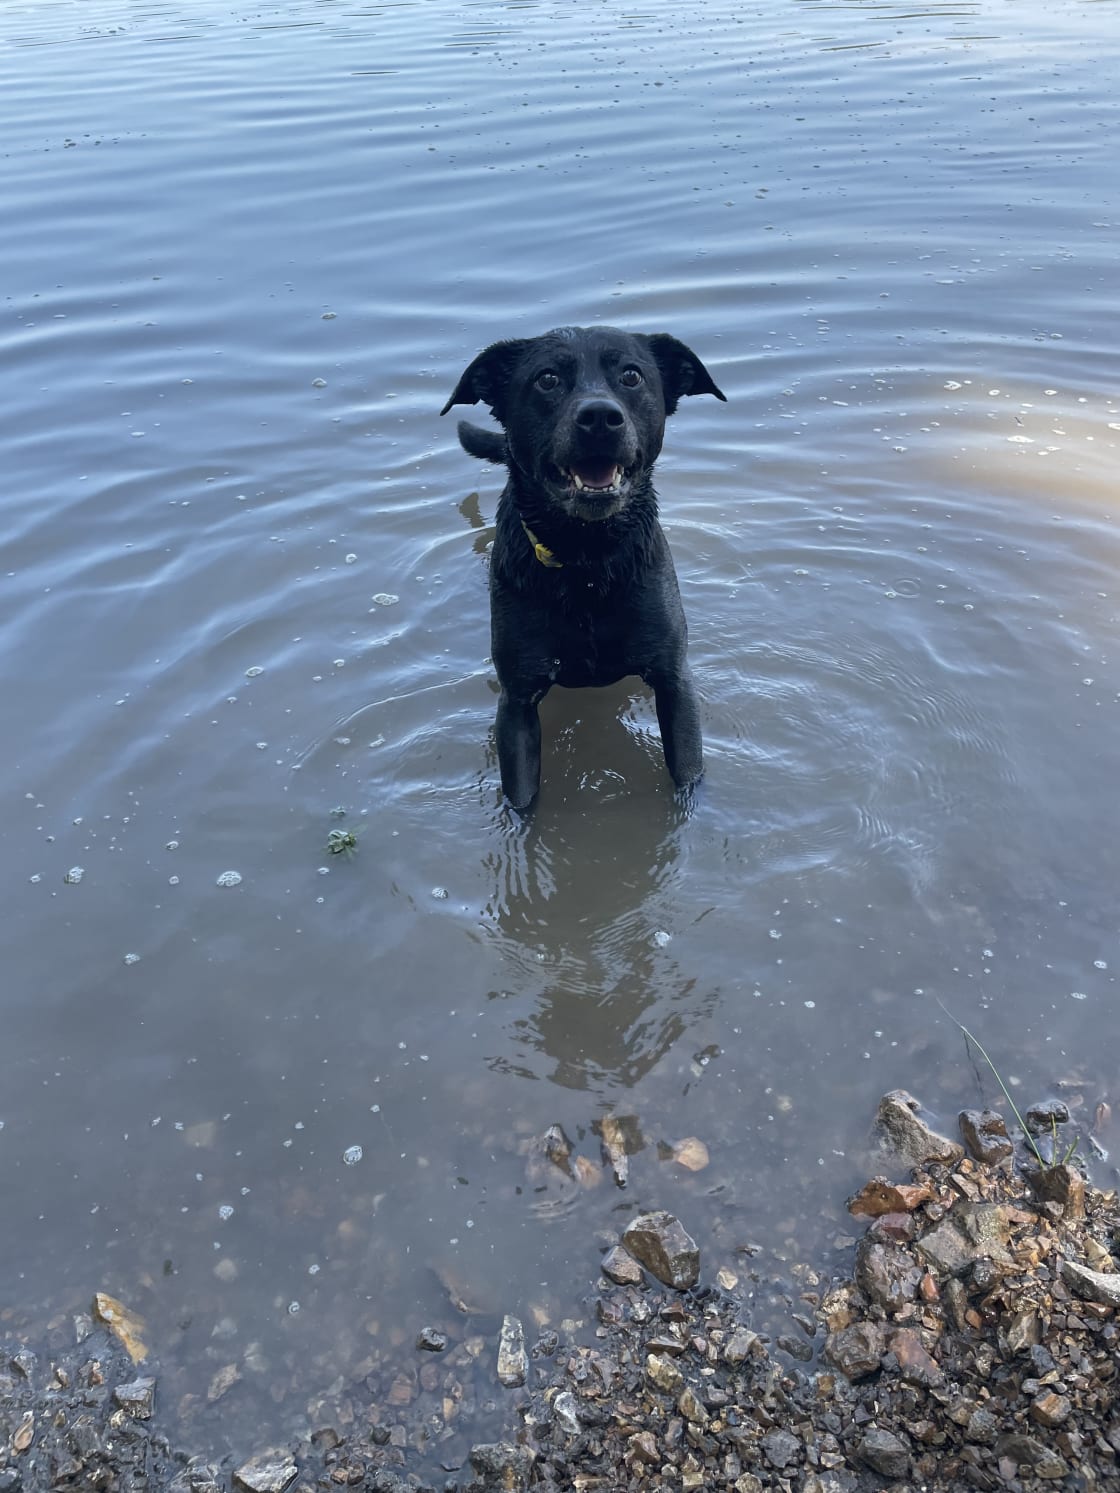 Our lab/Chesapeake mix had a blast in the water. 